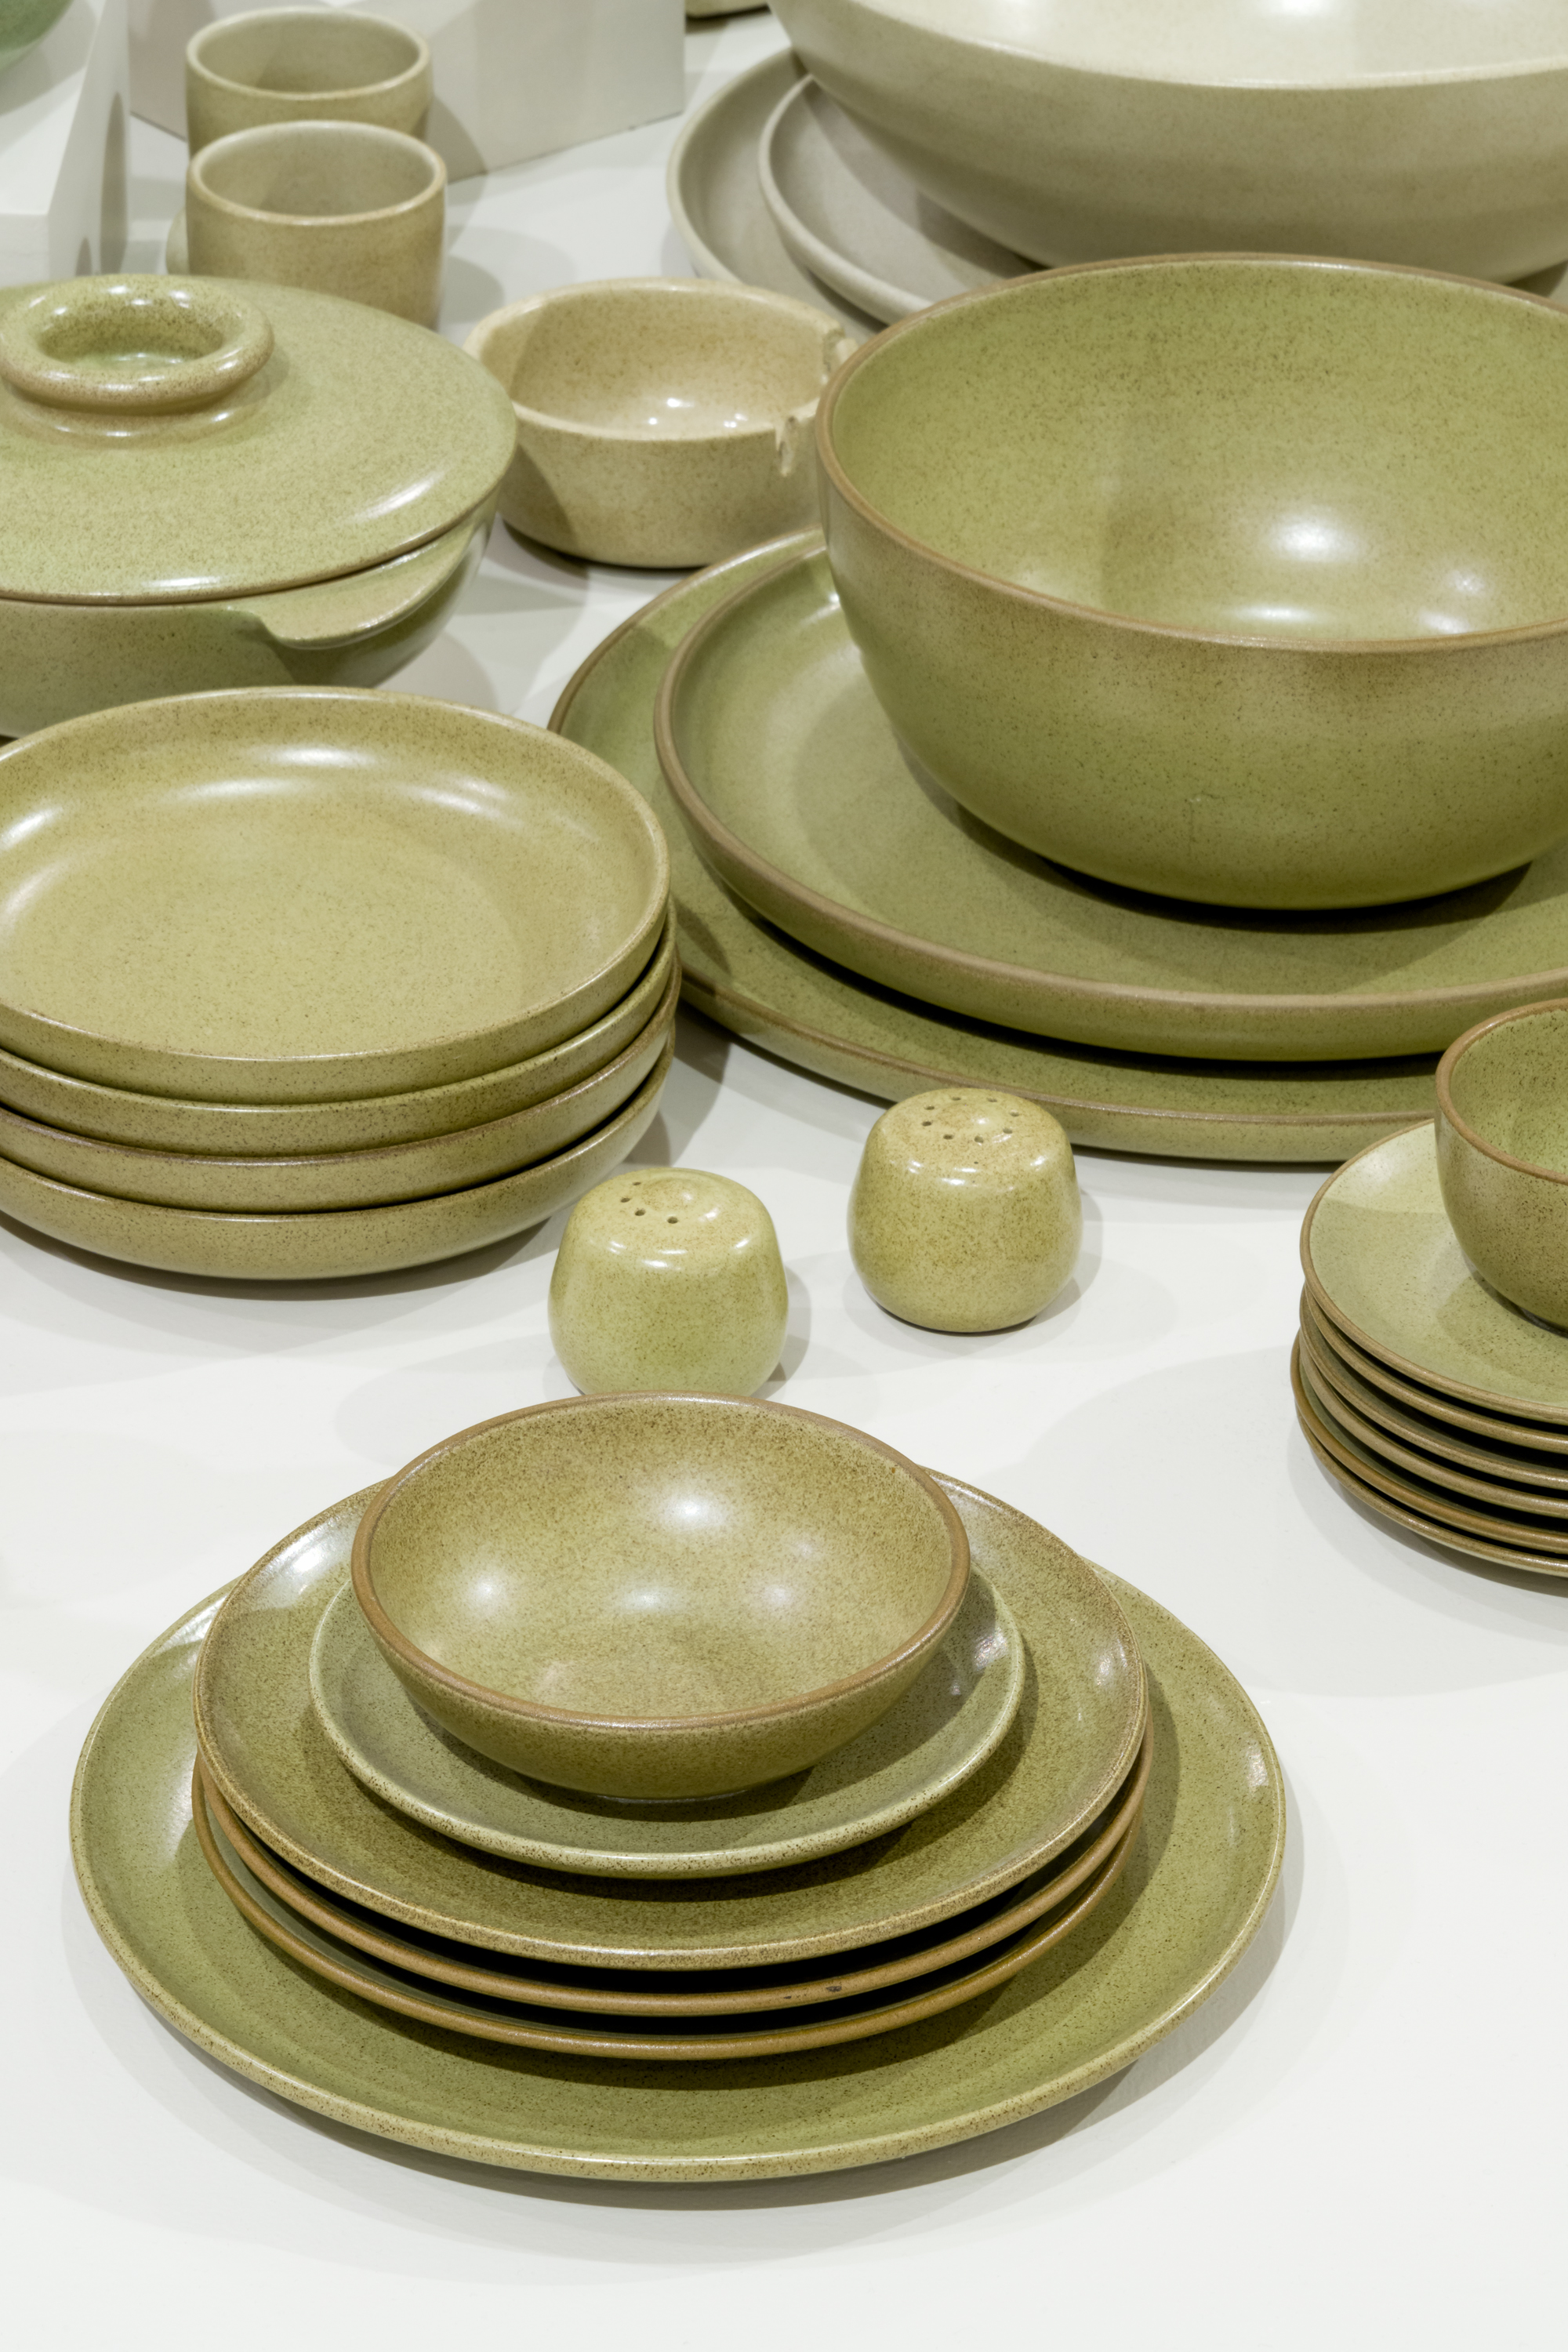 salt and pepper shakers, plates and bowls in light green glaze.